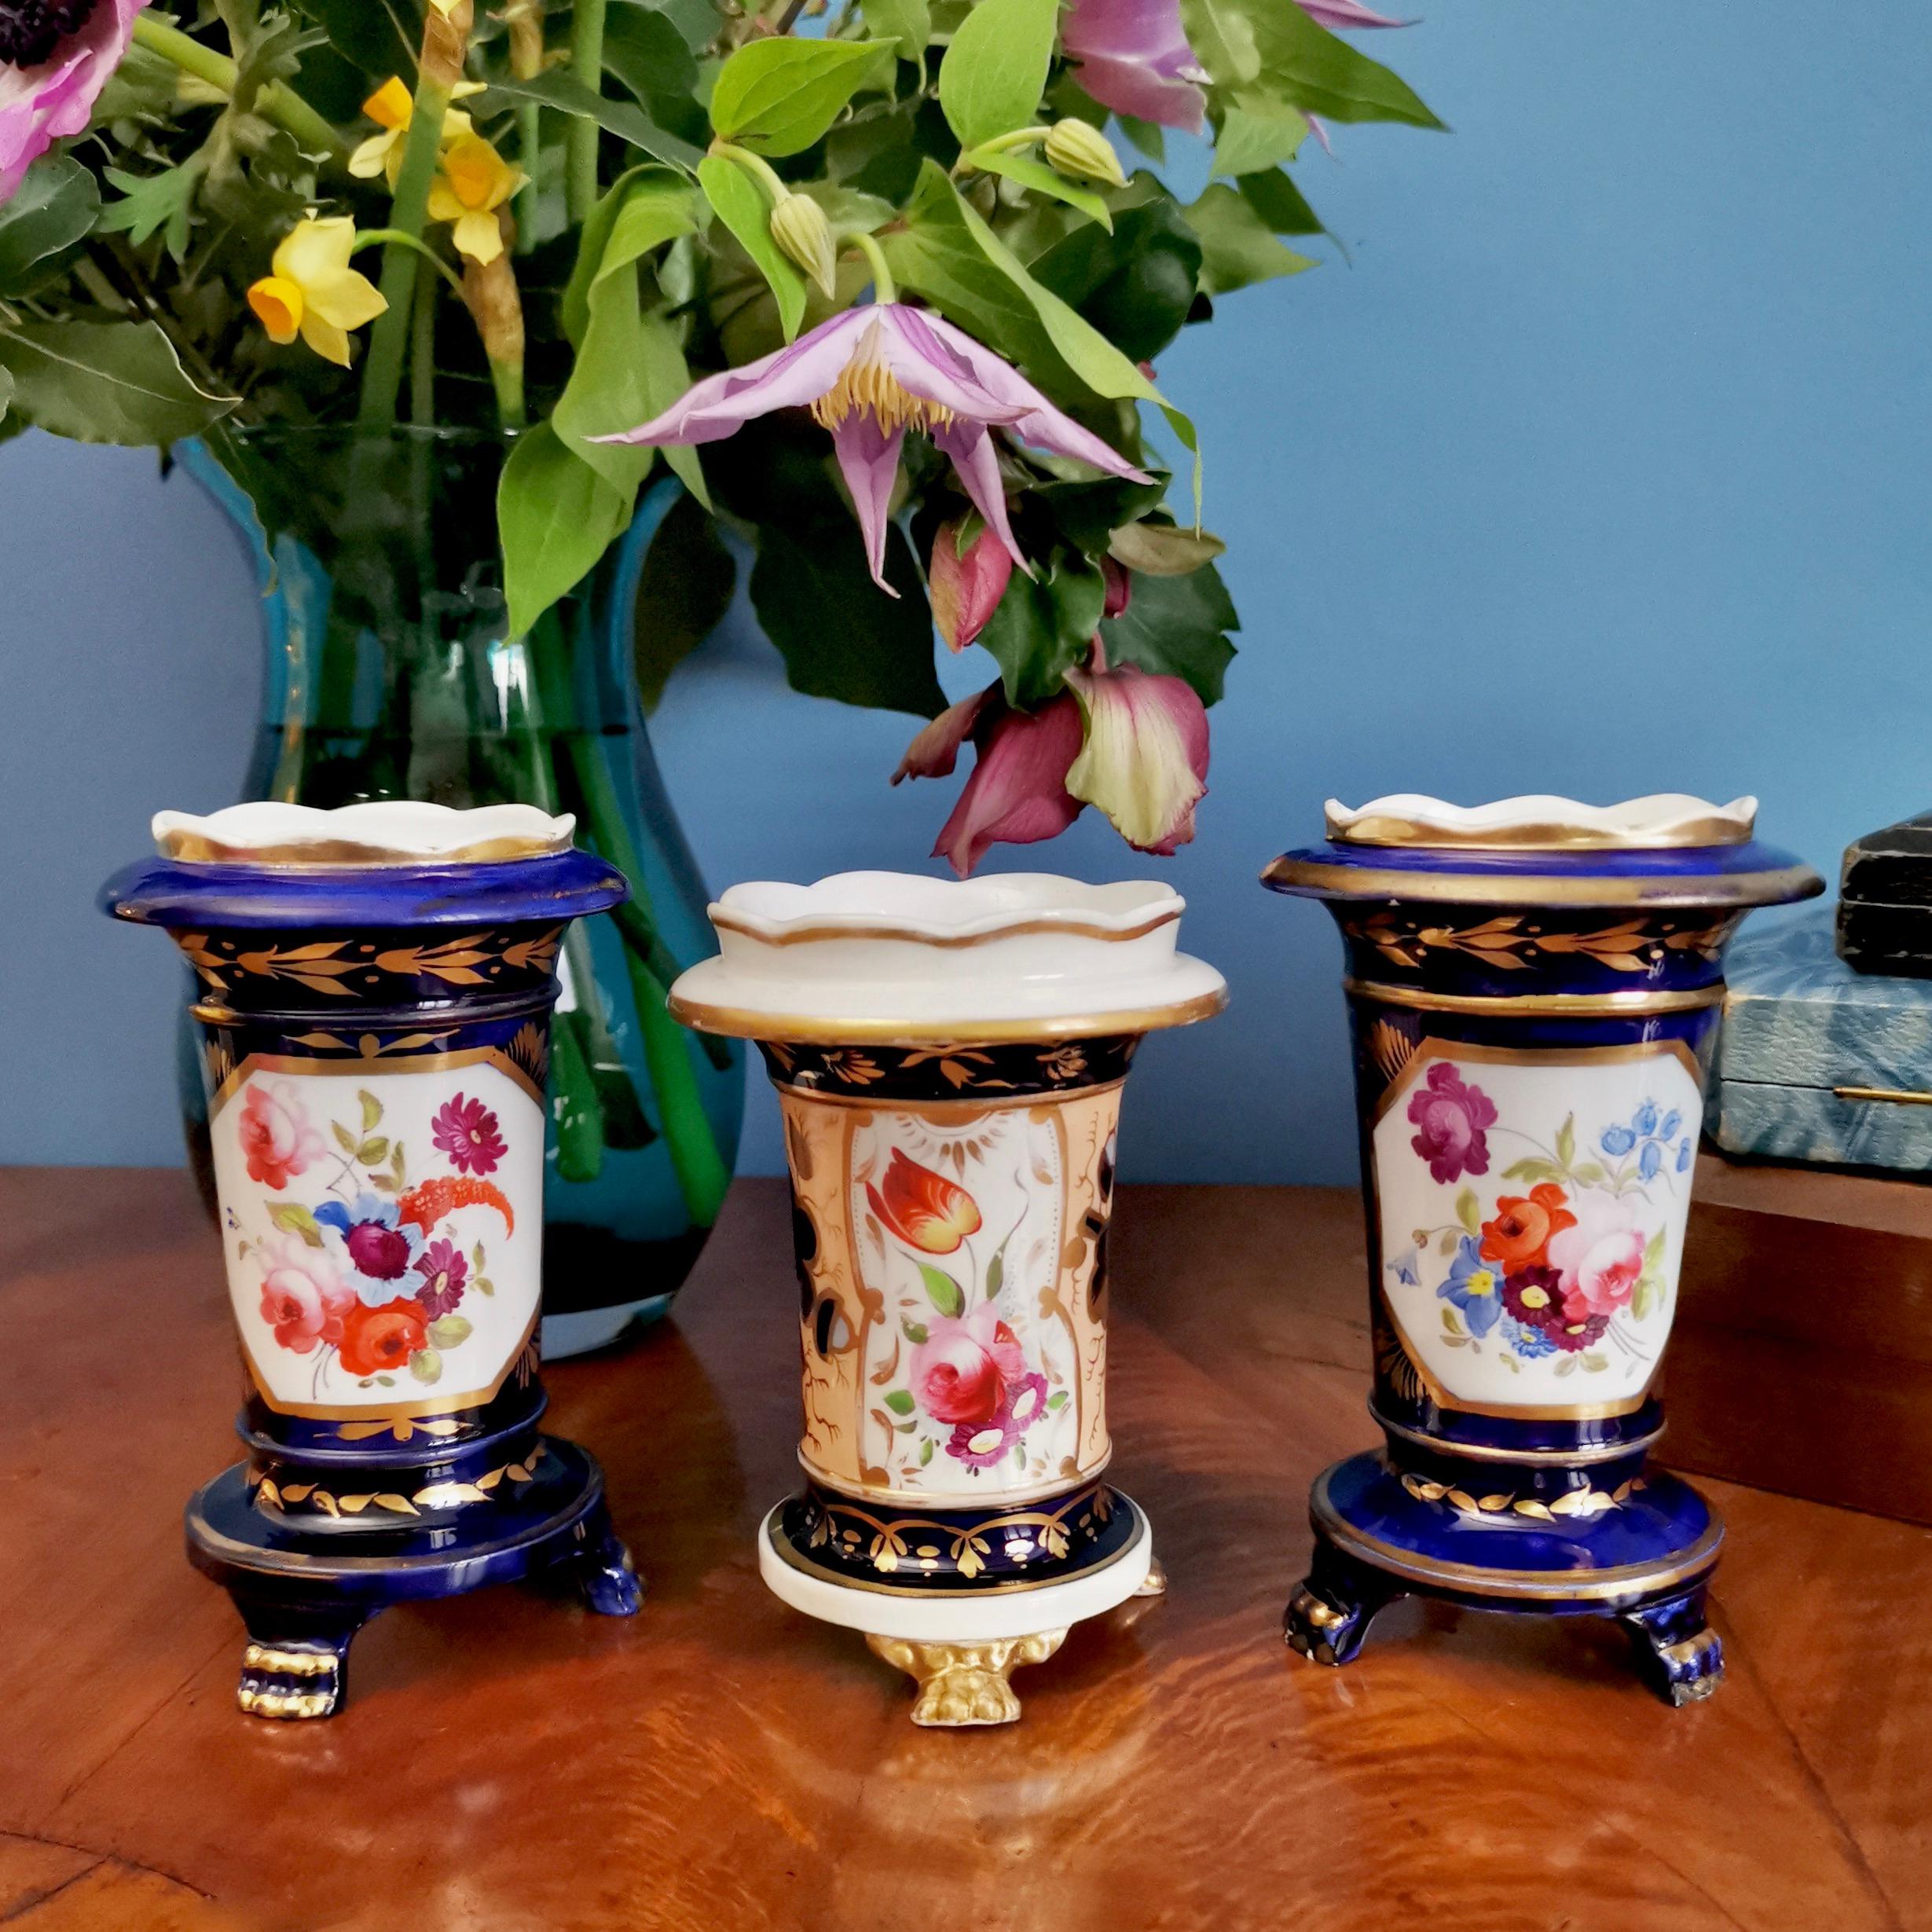 This is a set of three little spill vases made by an unknown Staffordshire maker in circa 1820, which was the Regency era. Two of the vases are cobalt blue, one is salmon, and all three have beautiful gilding and hand painted flowers.

Spill vases